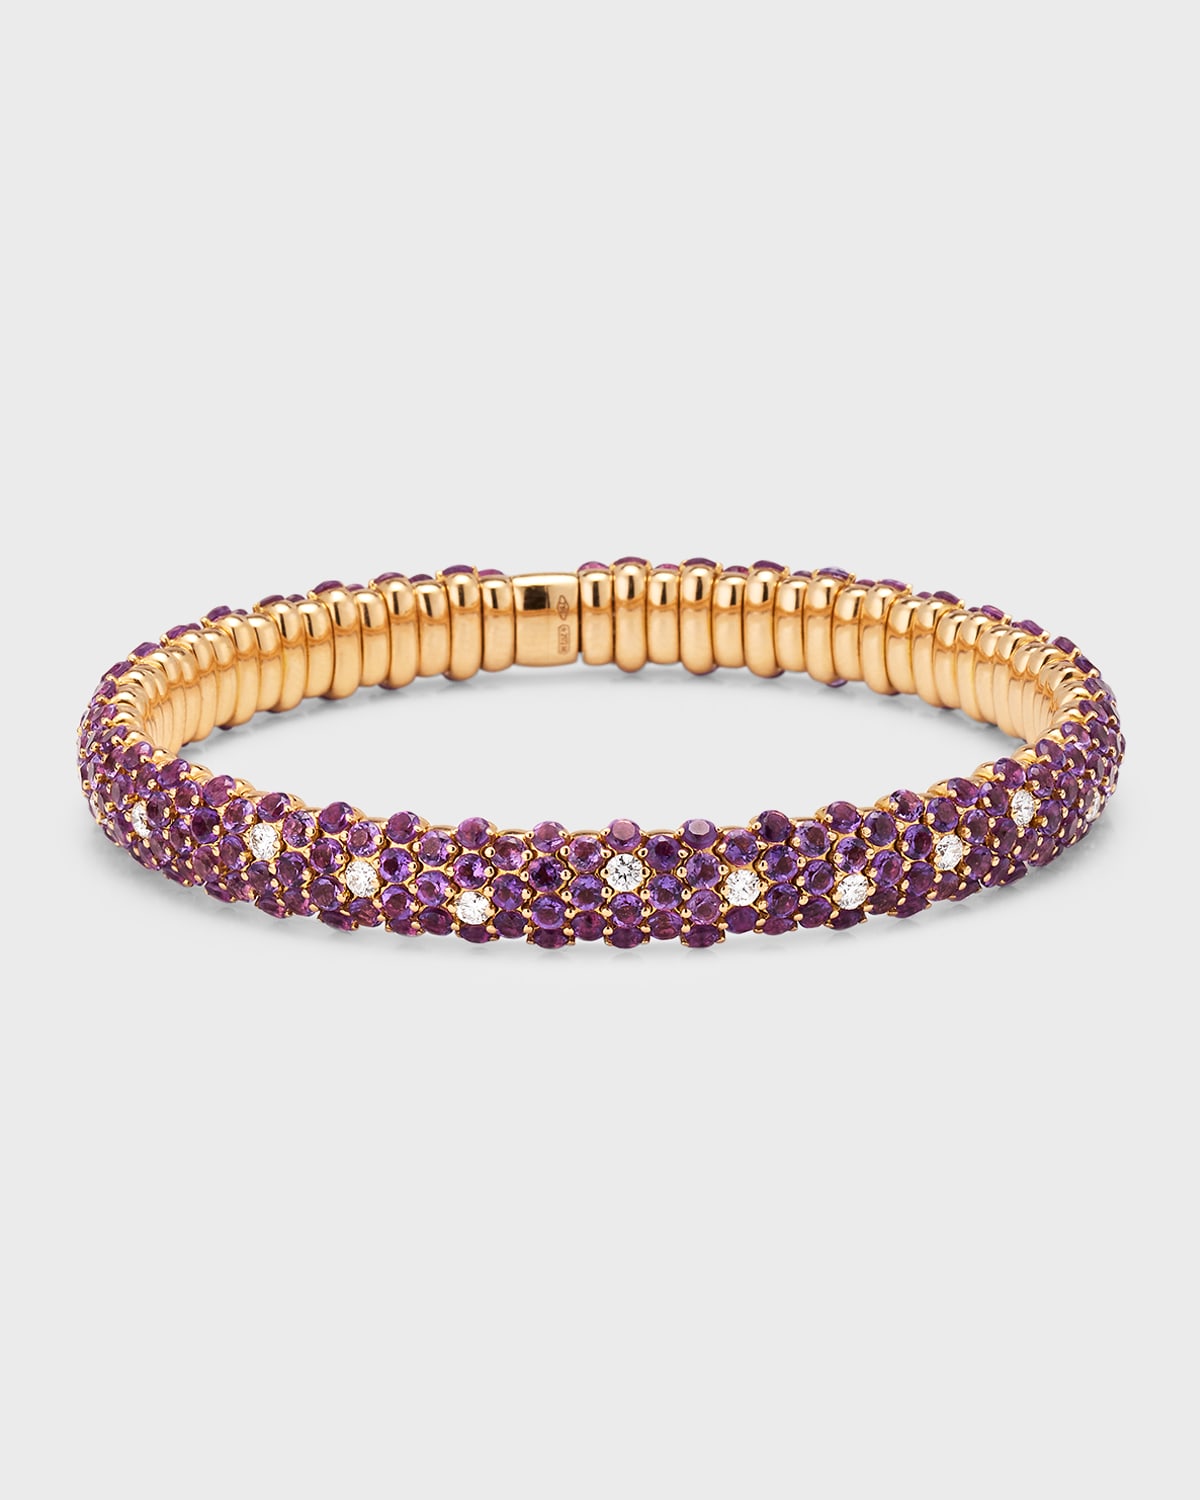 18K Rose Gold Bracelet with Diamonds and Amethyst